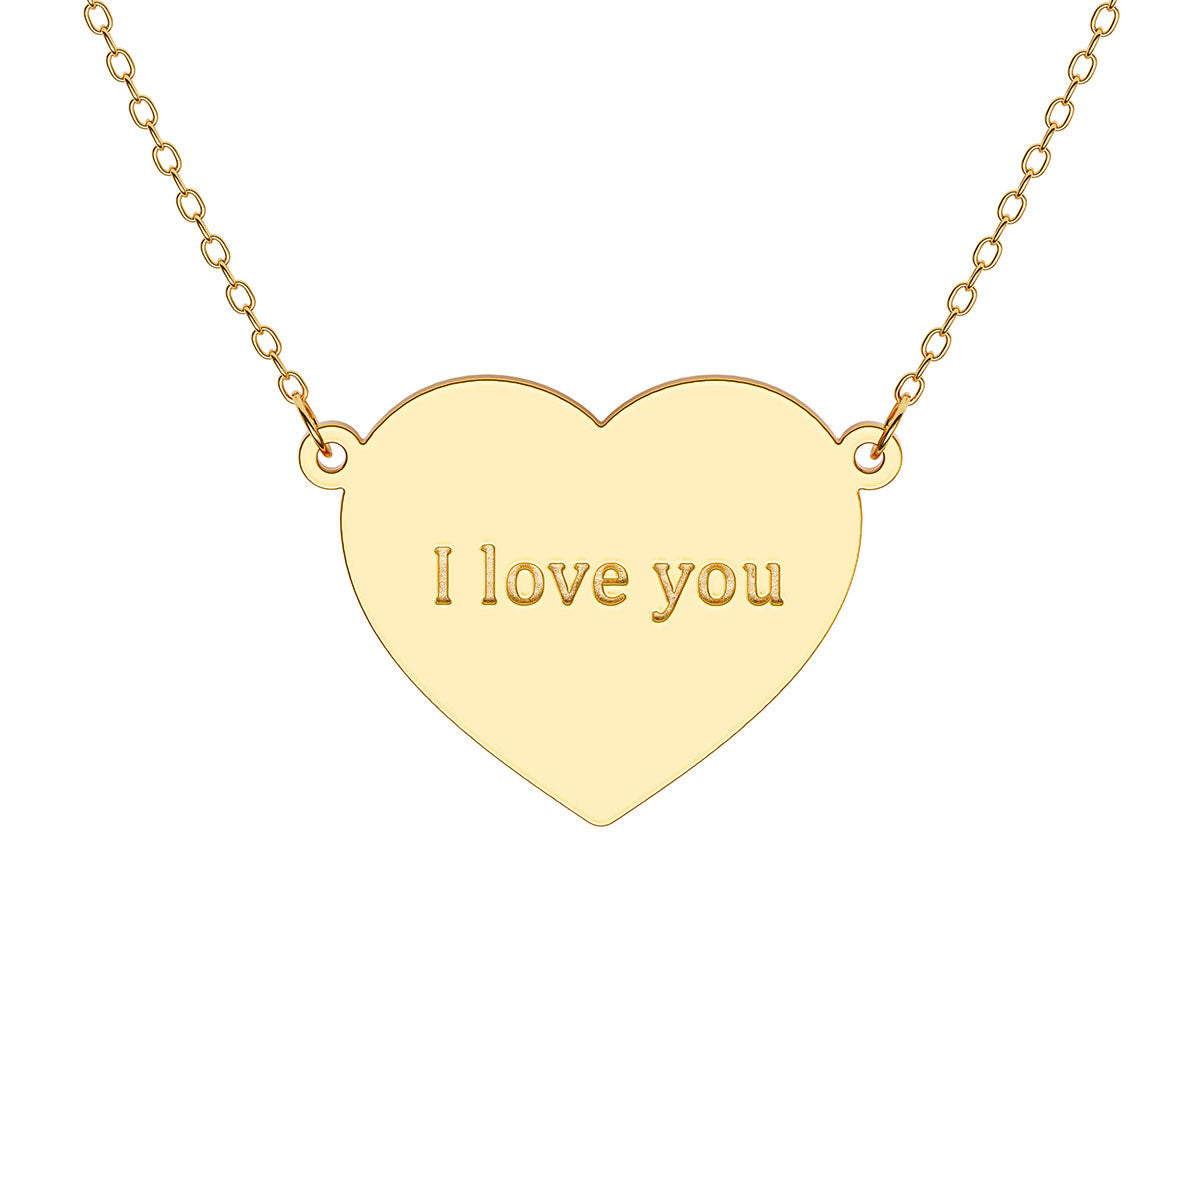 Heart Necklace with Personalized Engraving